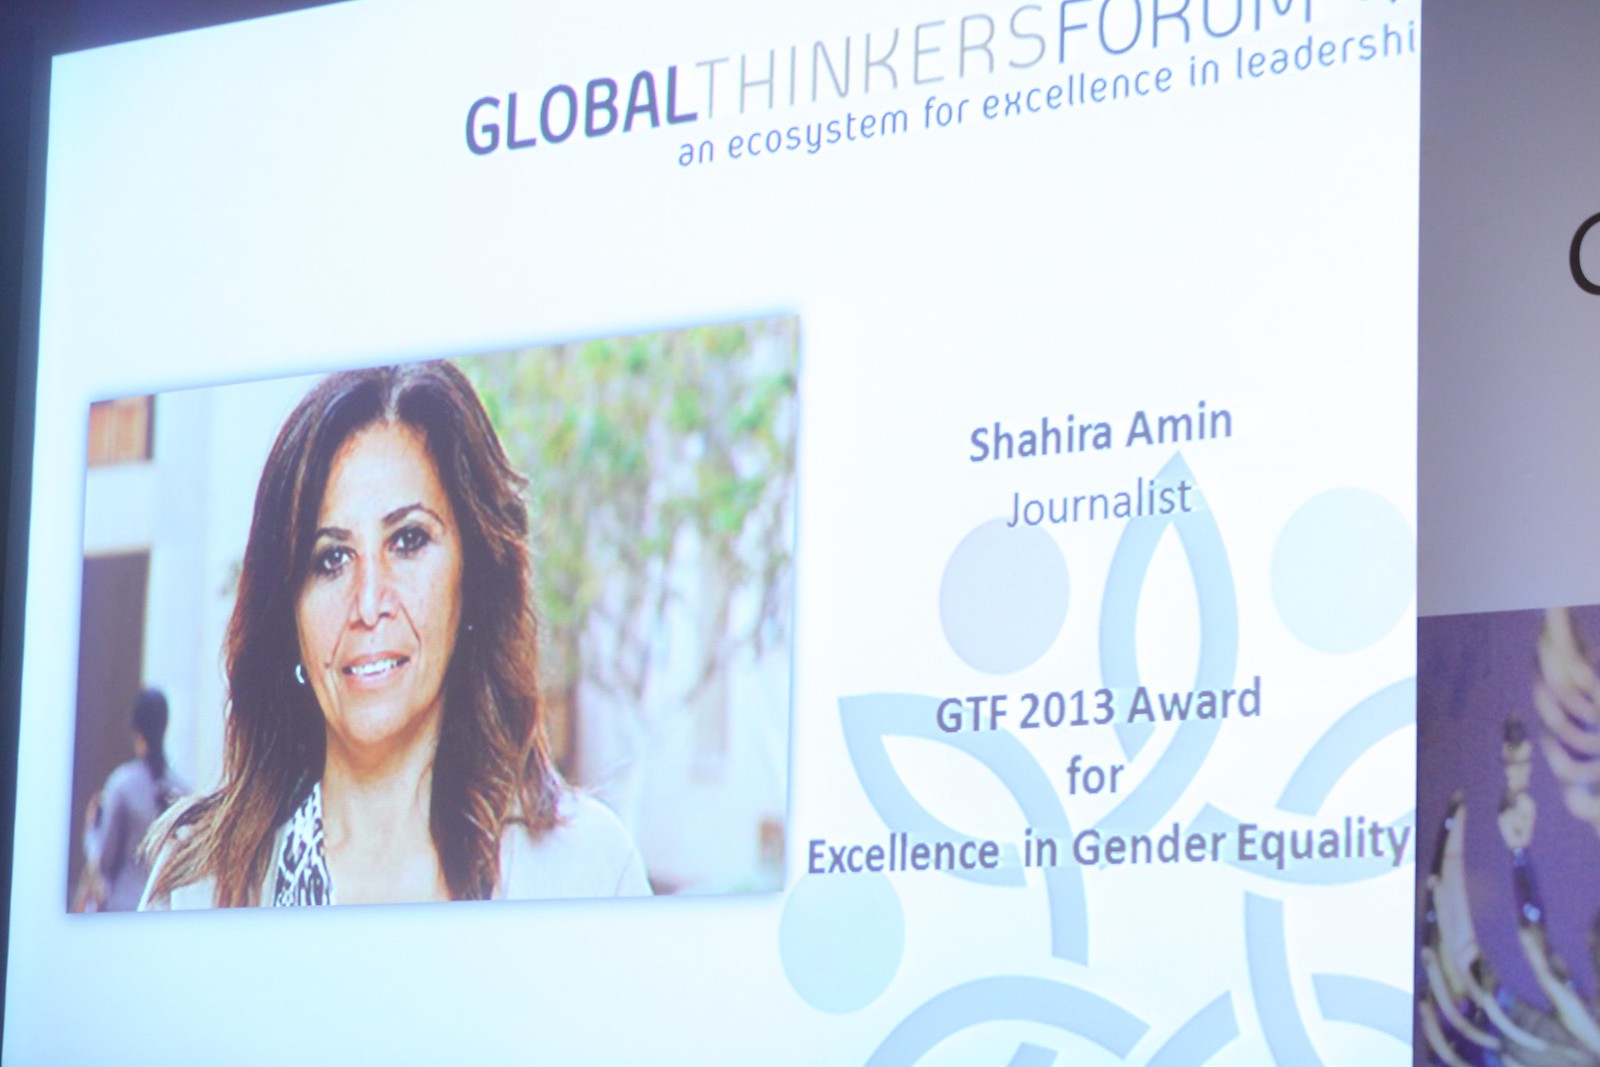 Egyptian Journalist Shahira Amin receiving the GTF 2013 Award for Excellence in Gender Equality